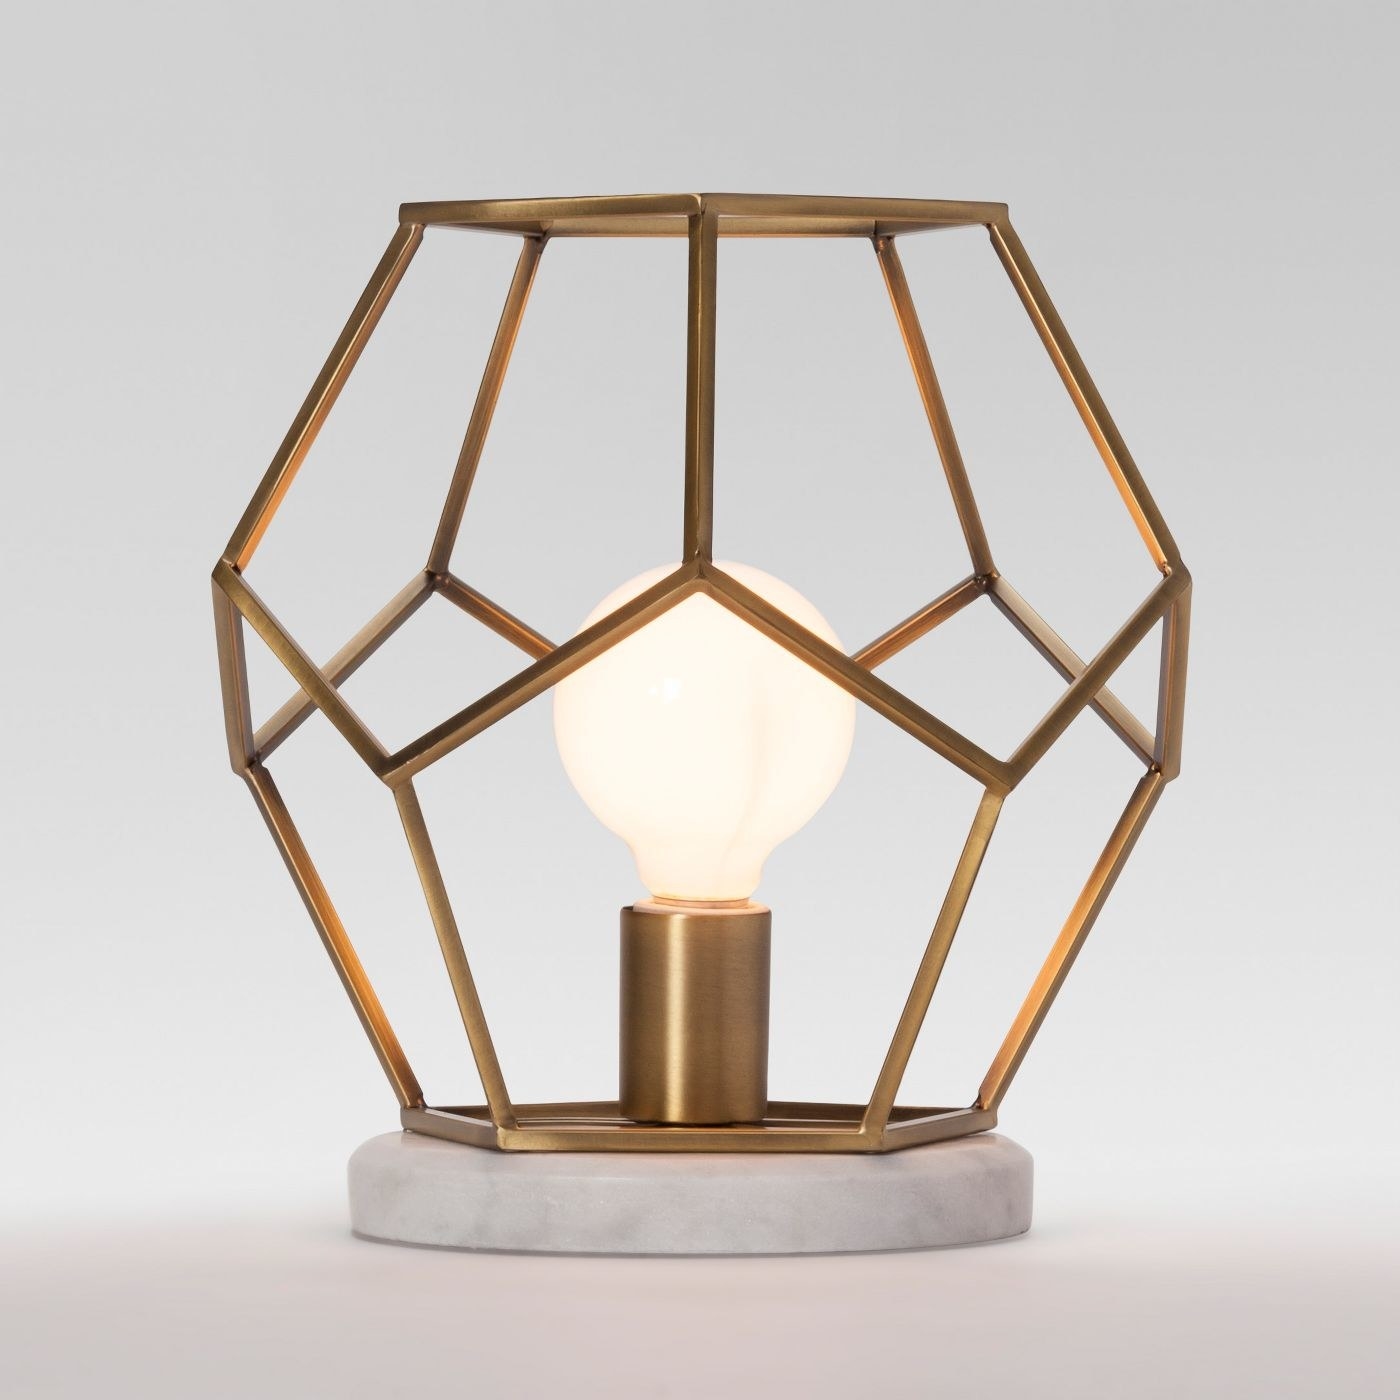 the gold geodesic lamp